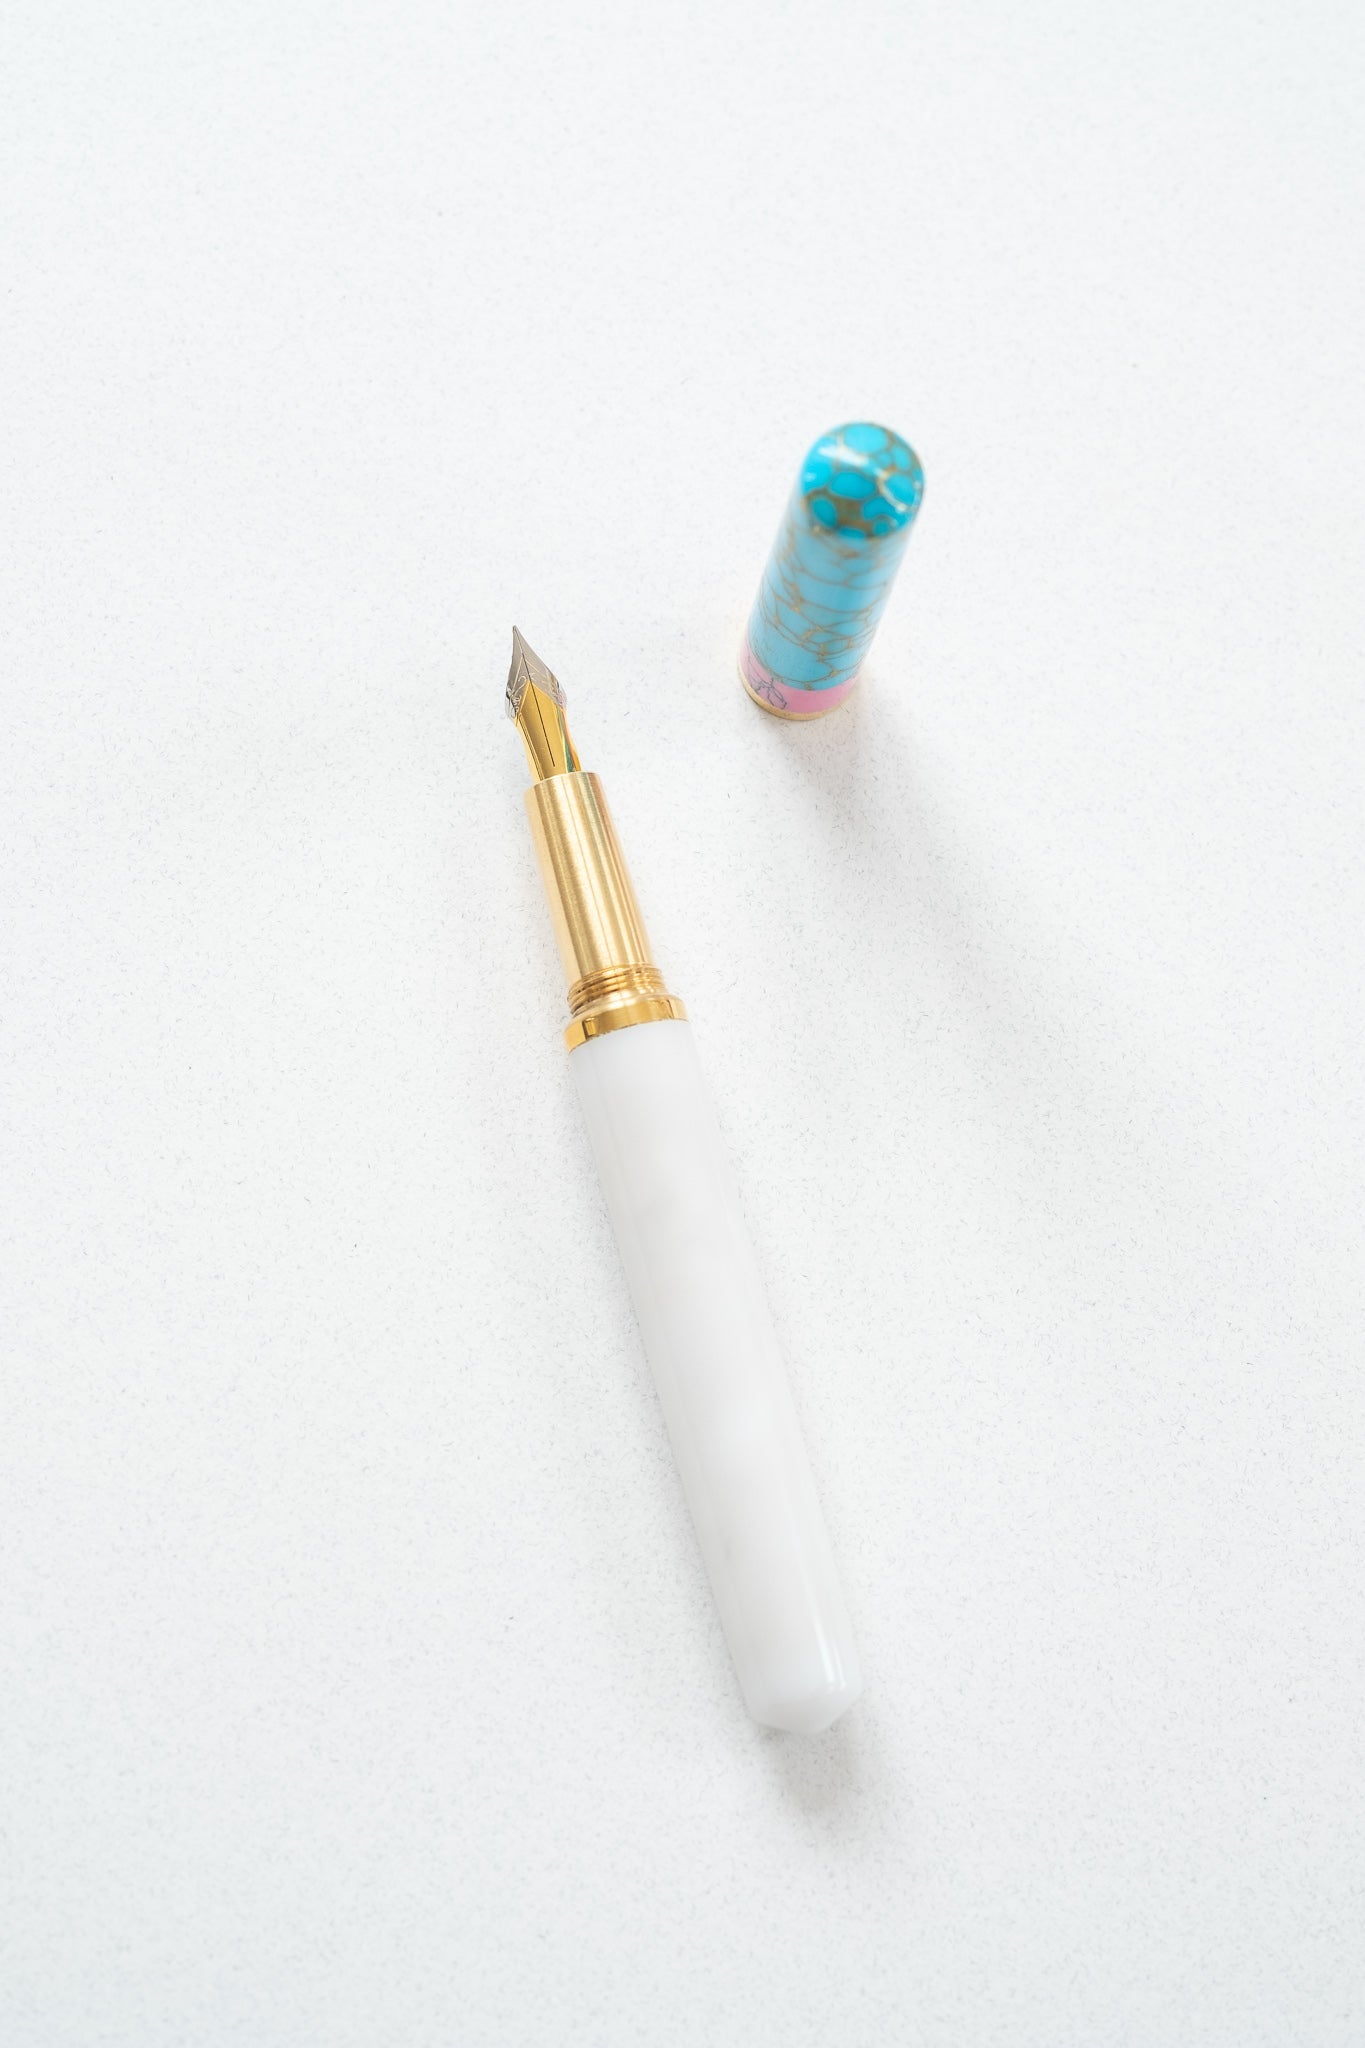 Pink + Turquoise Studio Fountain Pen with a flexible nib